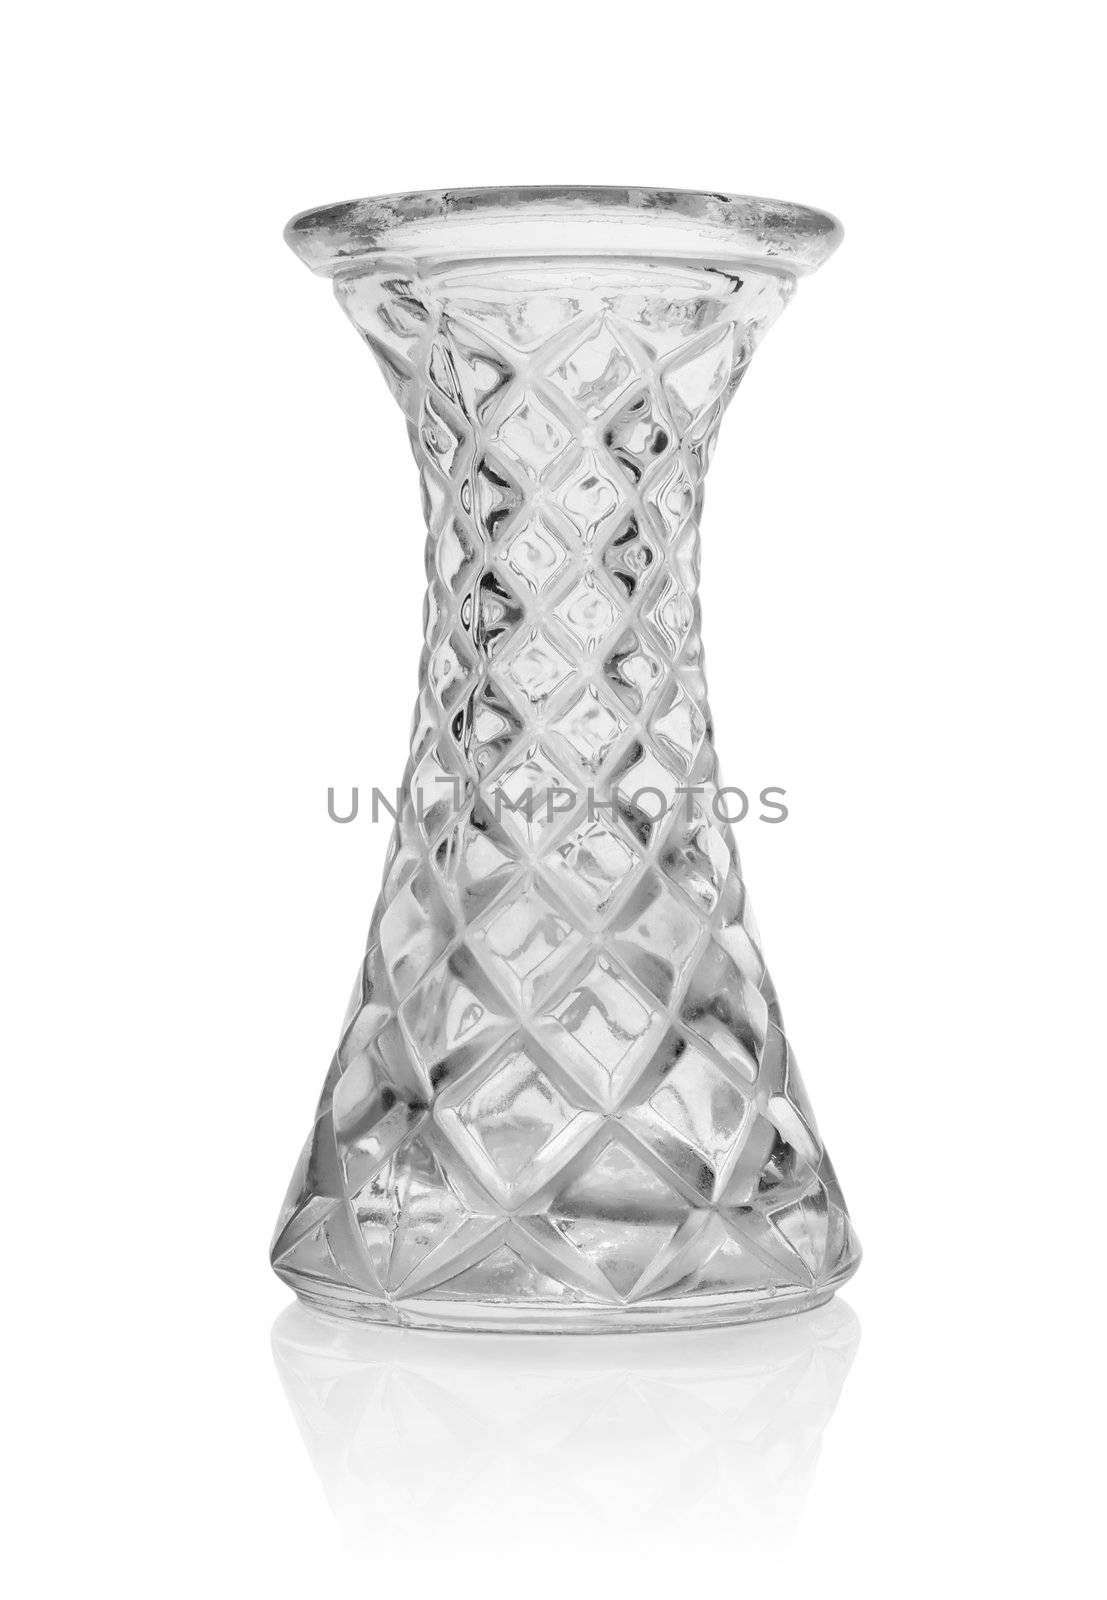 Glass vase isolated on a white background